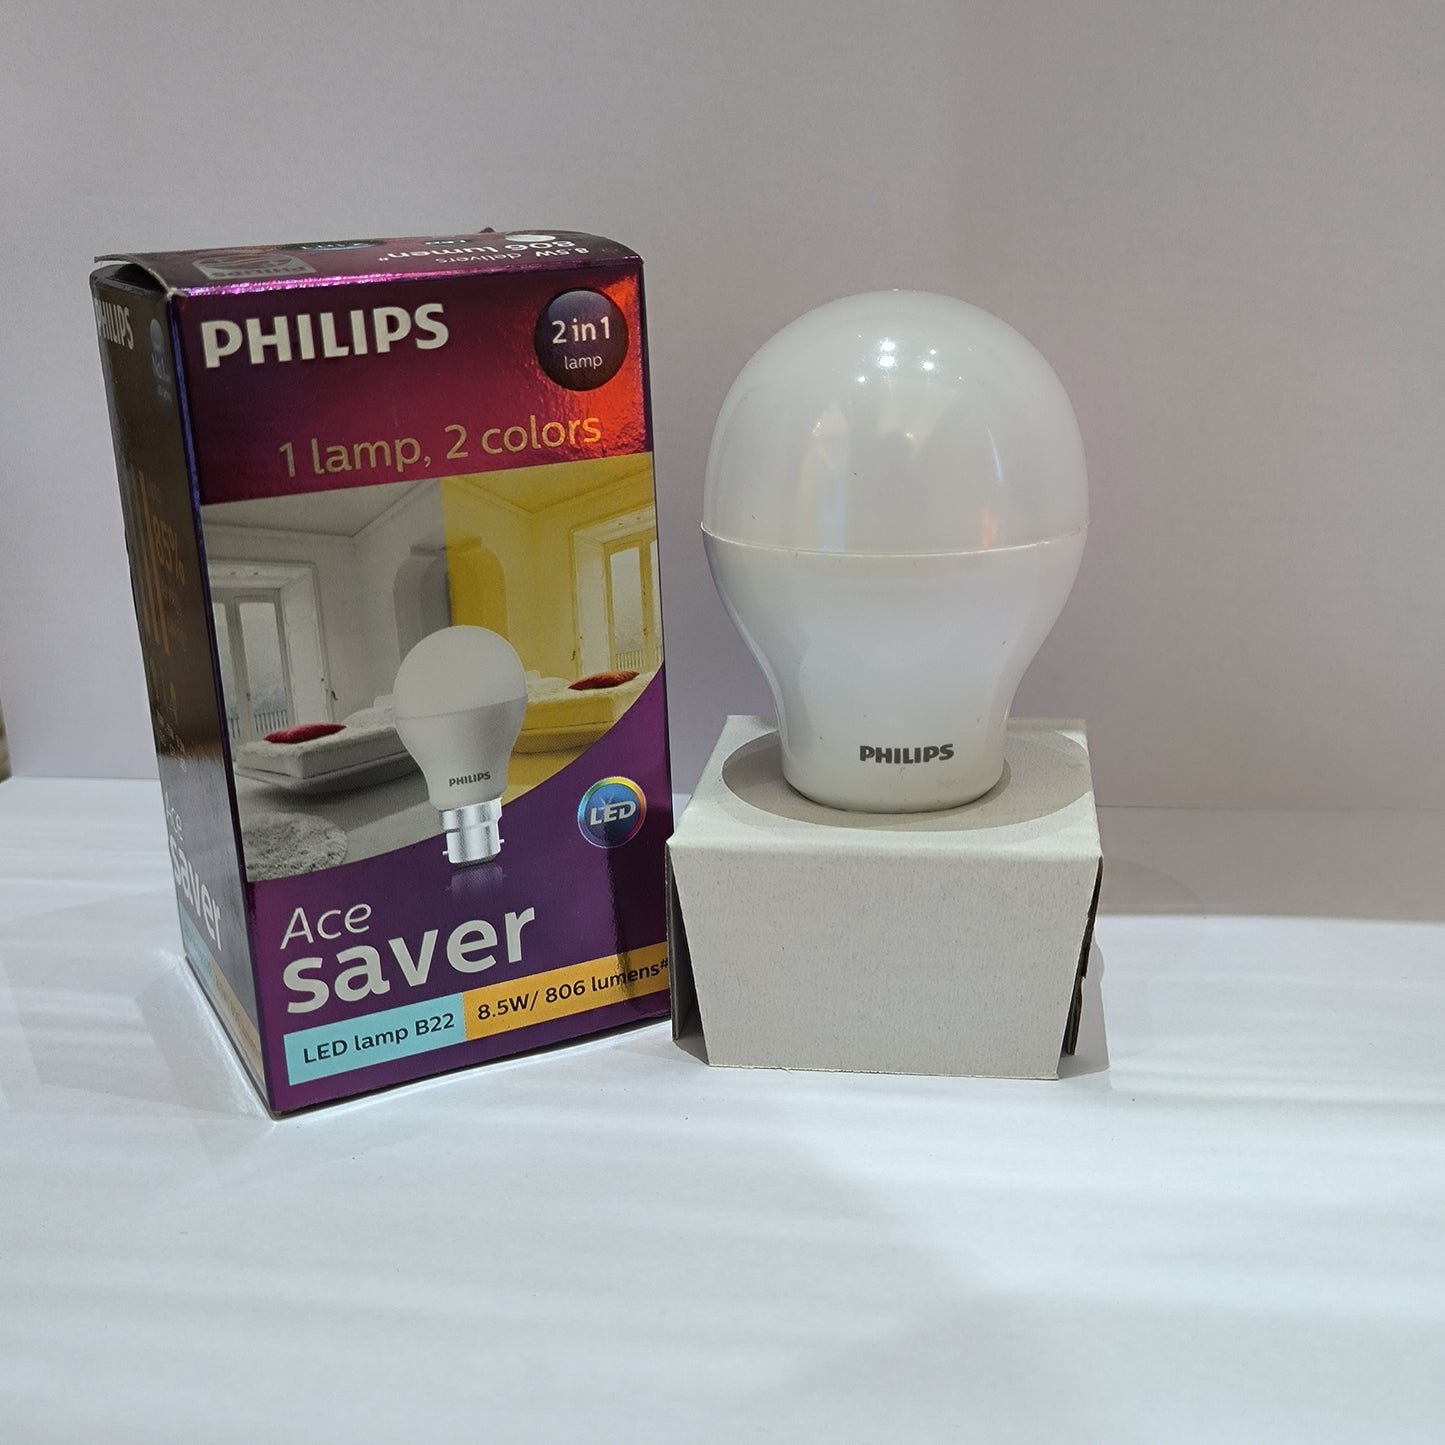 2-IN-1 Ace Saver Round Shape Bulb - Crystal White/Golden Yellow, by Philips (8W/806 Lumens)